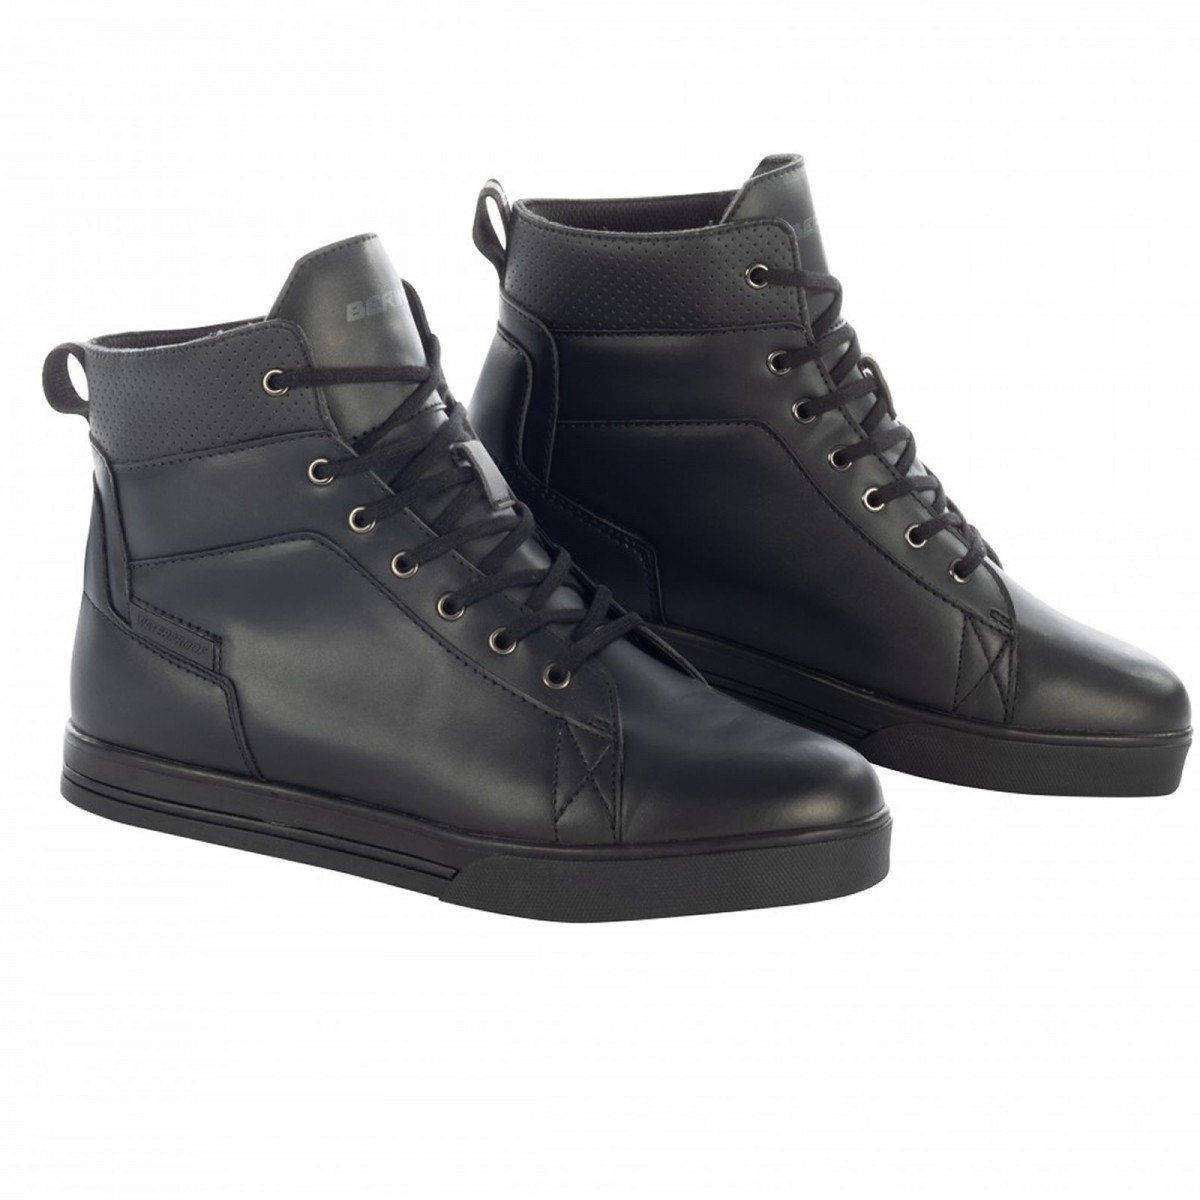 Image of Bering Sneakers Indy Black Talla 46